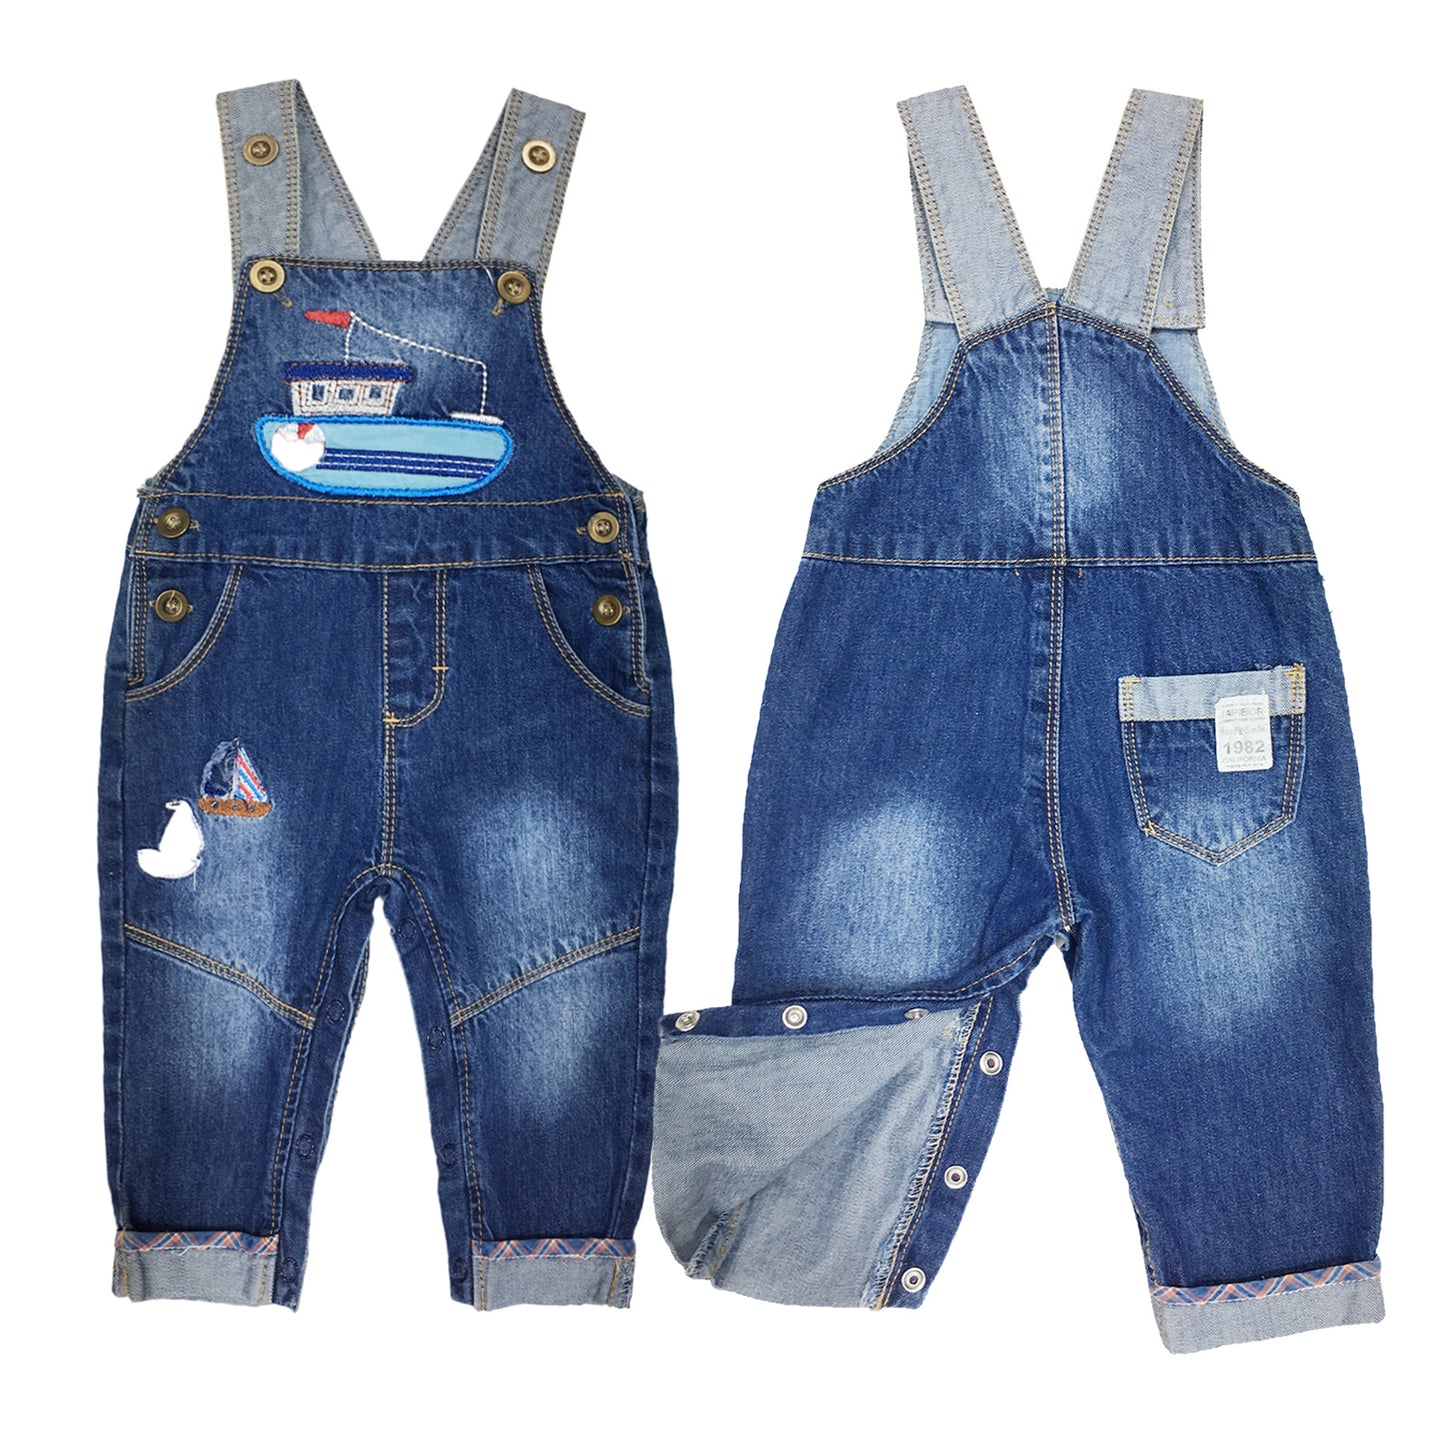 Toddler Baby Embroideried Cuffed Jeans Overalls